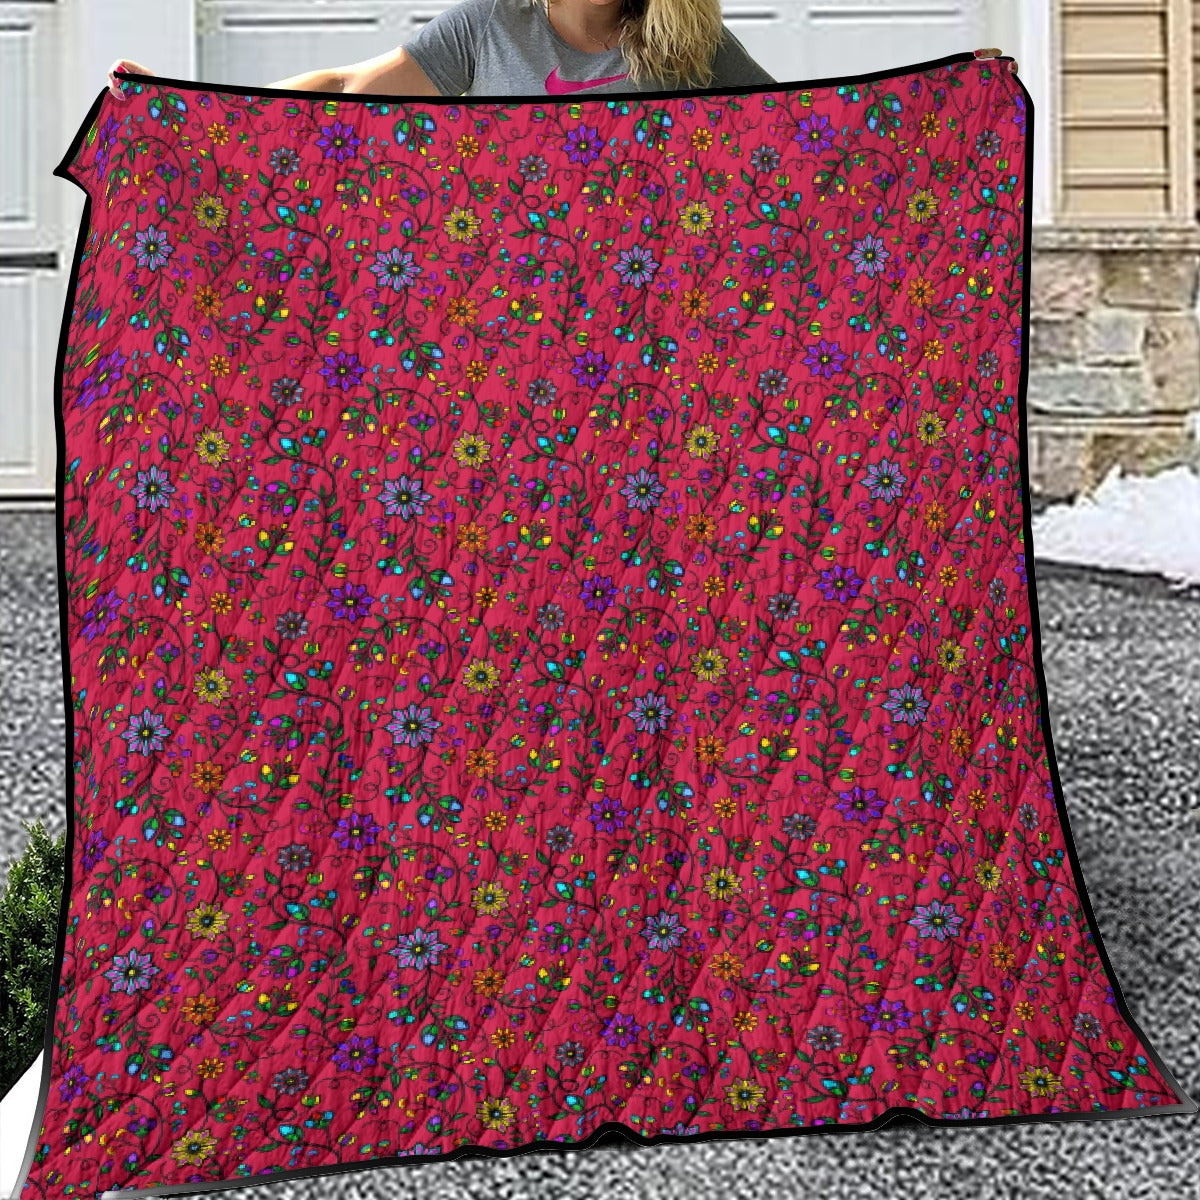 Prairie Paintbrush Passion Berry Lightweight & Breathable Quilt With Edge-wrapping Strips